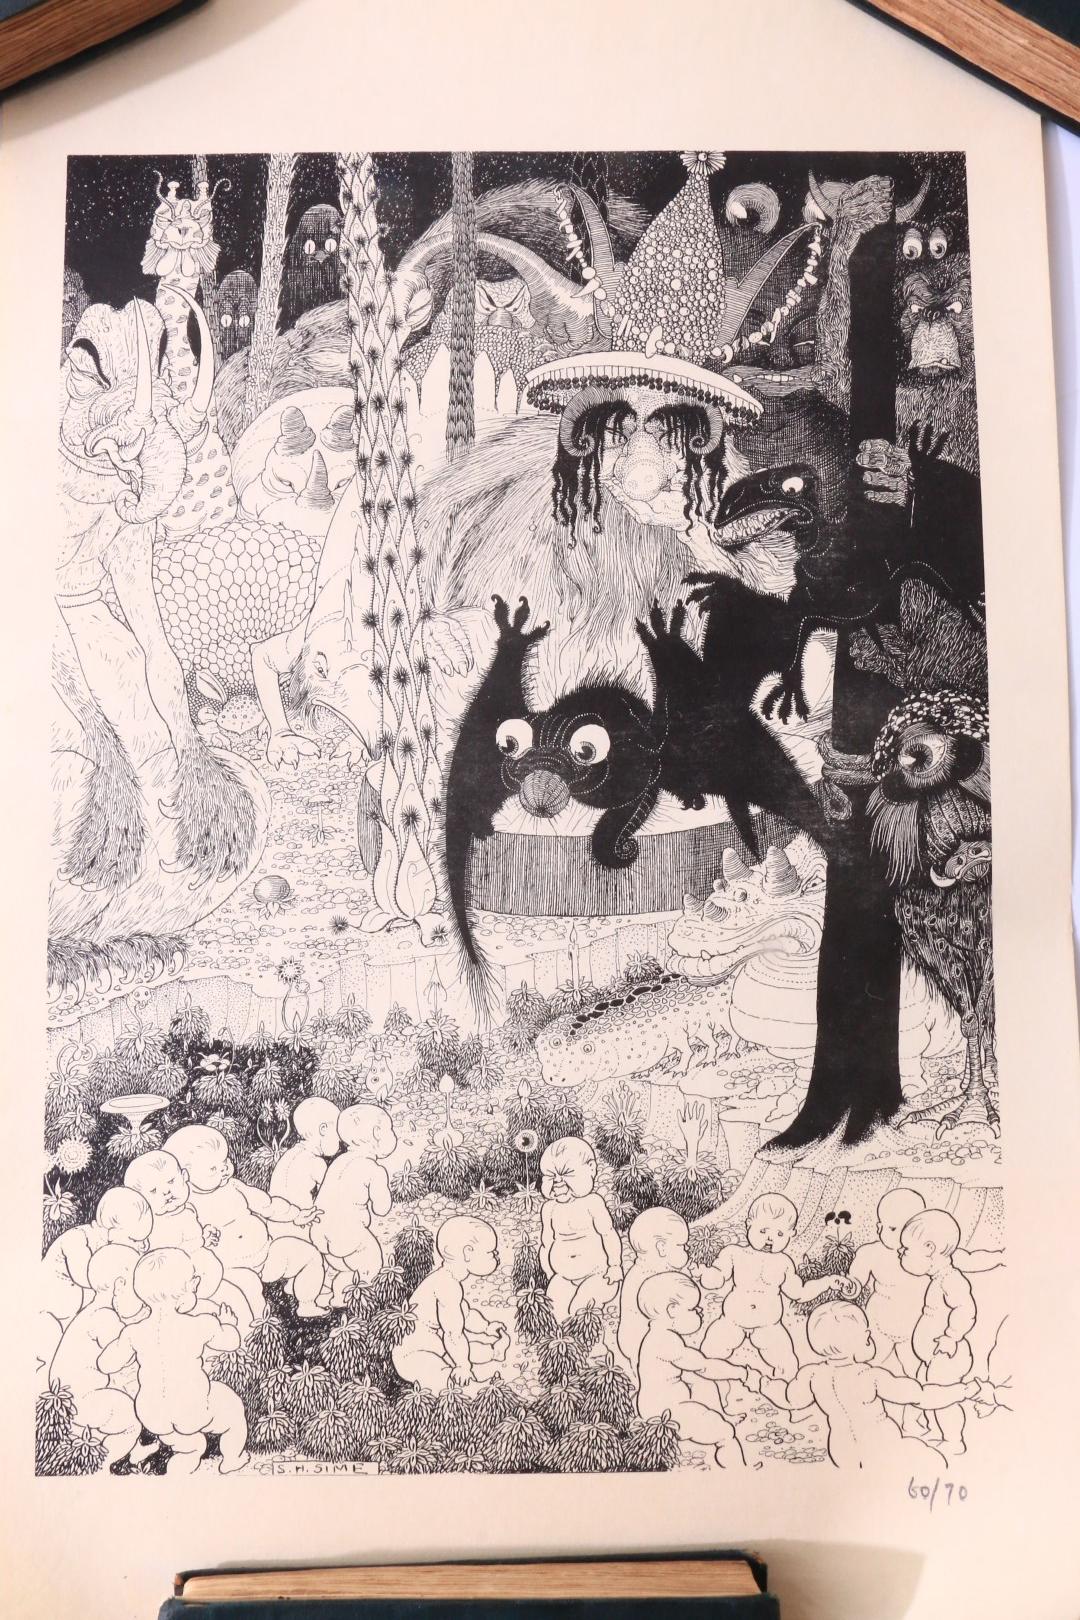 Sidney H. Sime - The Zagabog: A Limited Edition Print - None, n.d. [c1970], Limited Edition.